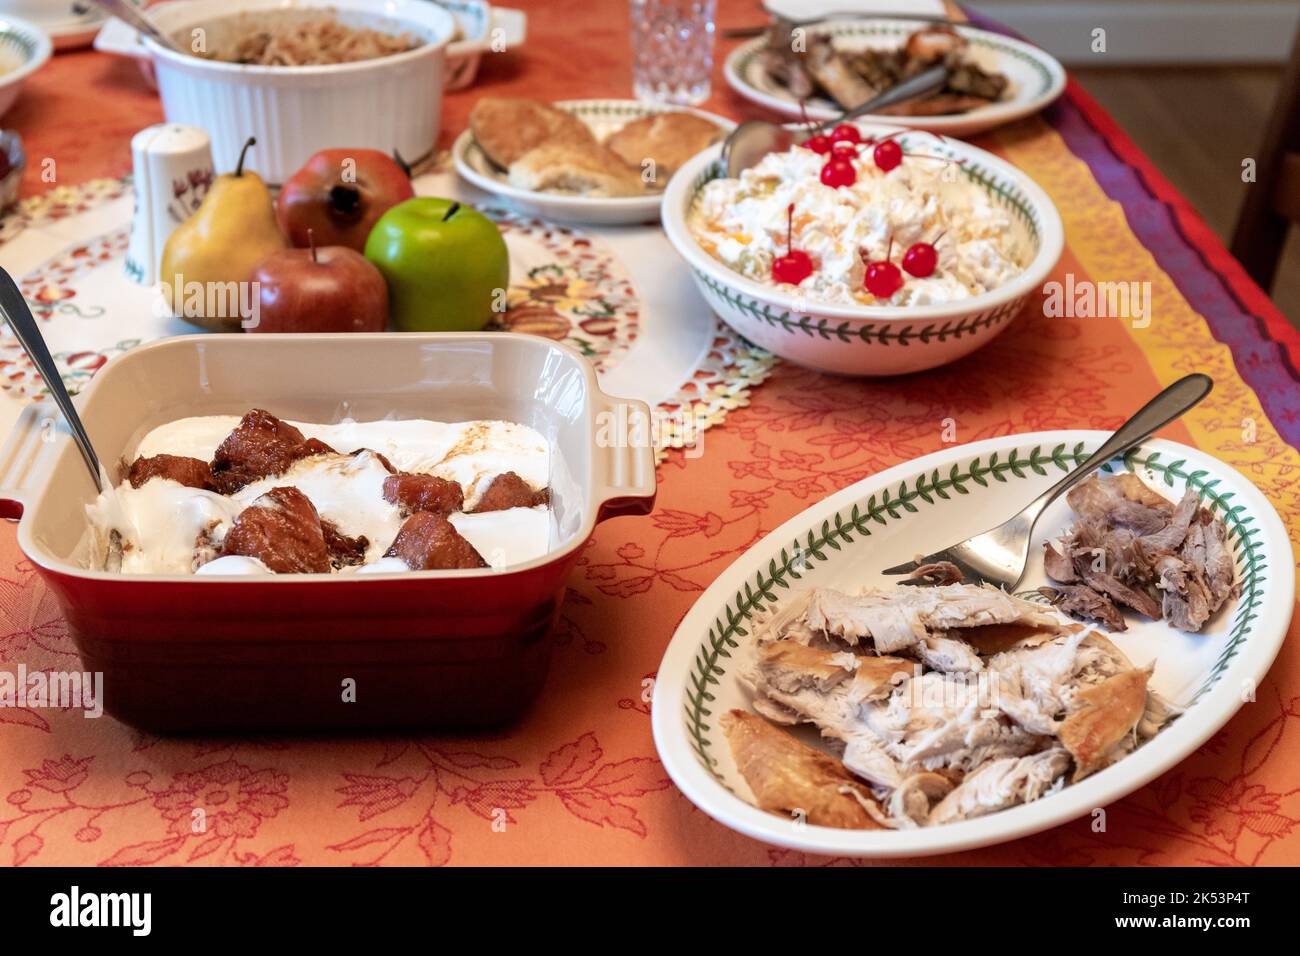 Closeup View of Thanksgiving Dinner Table with Turkey, Candied Yams and Fruit Salad Stock Photo